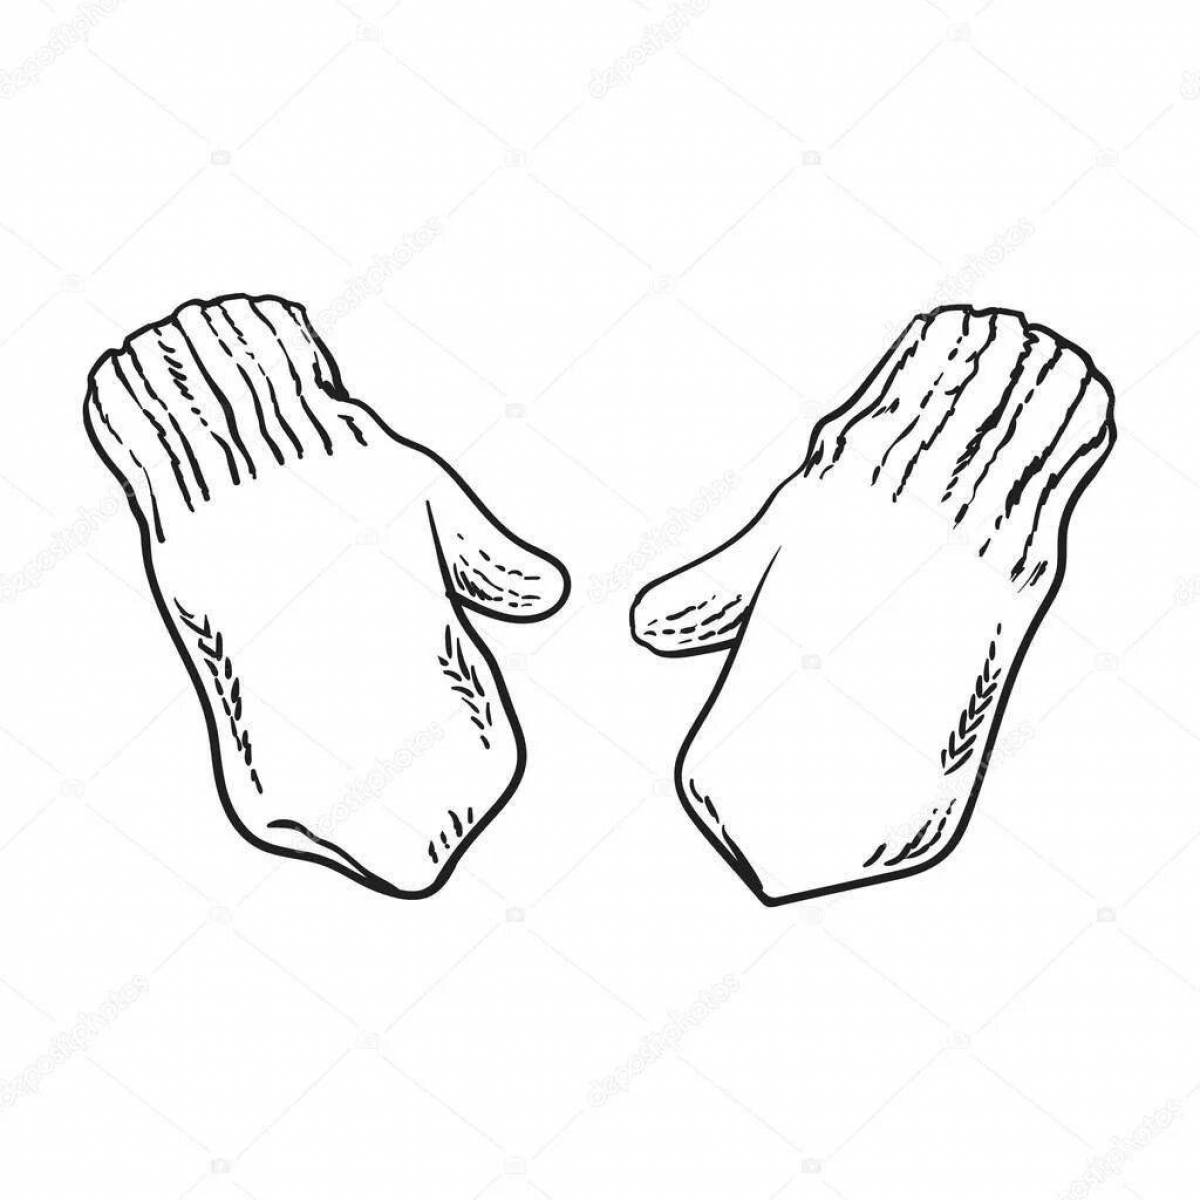 Coloring page fascinating rubber mittens